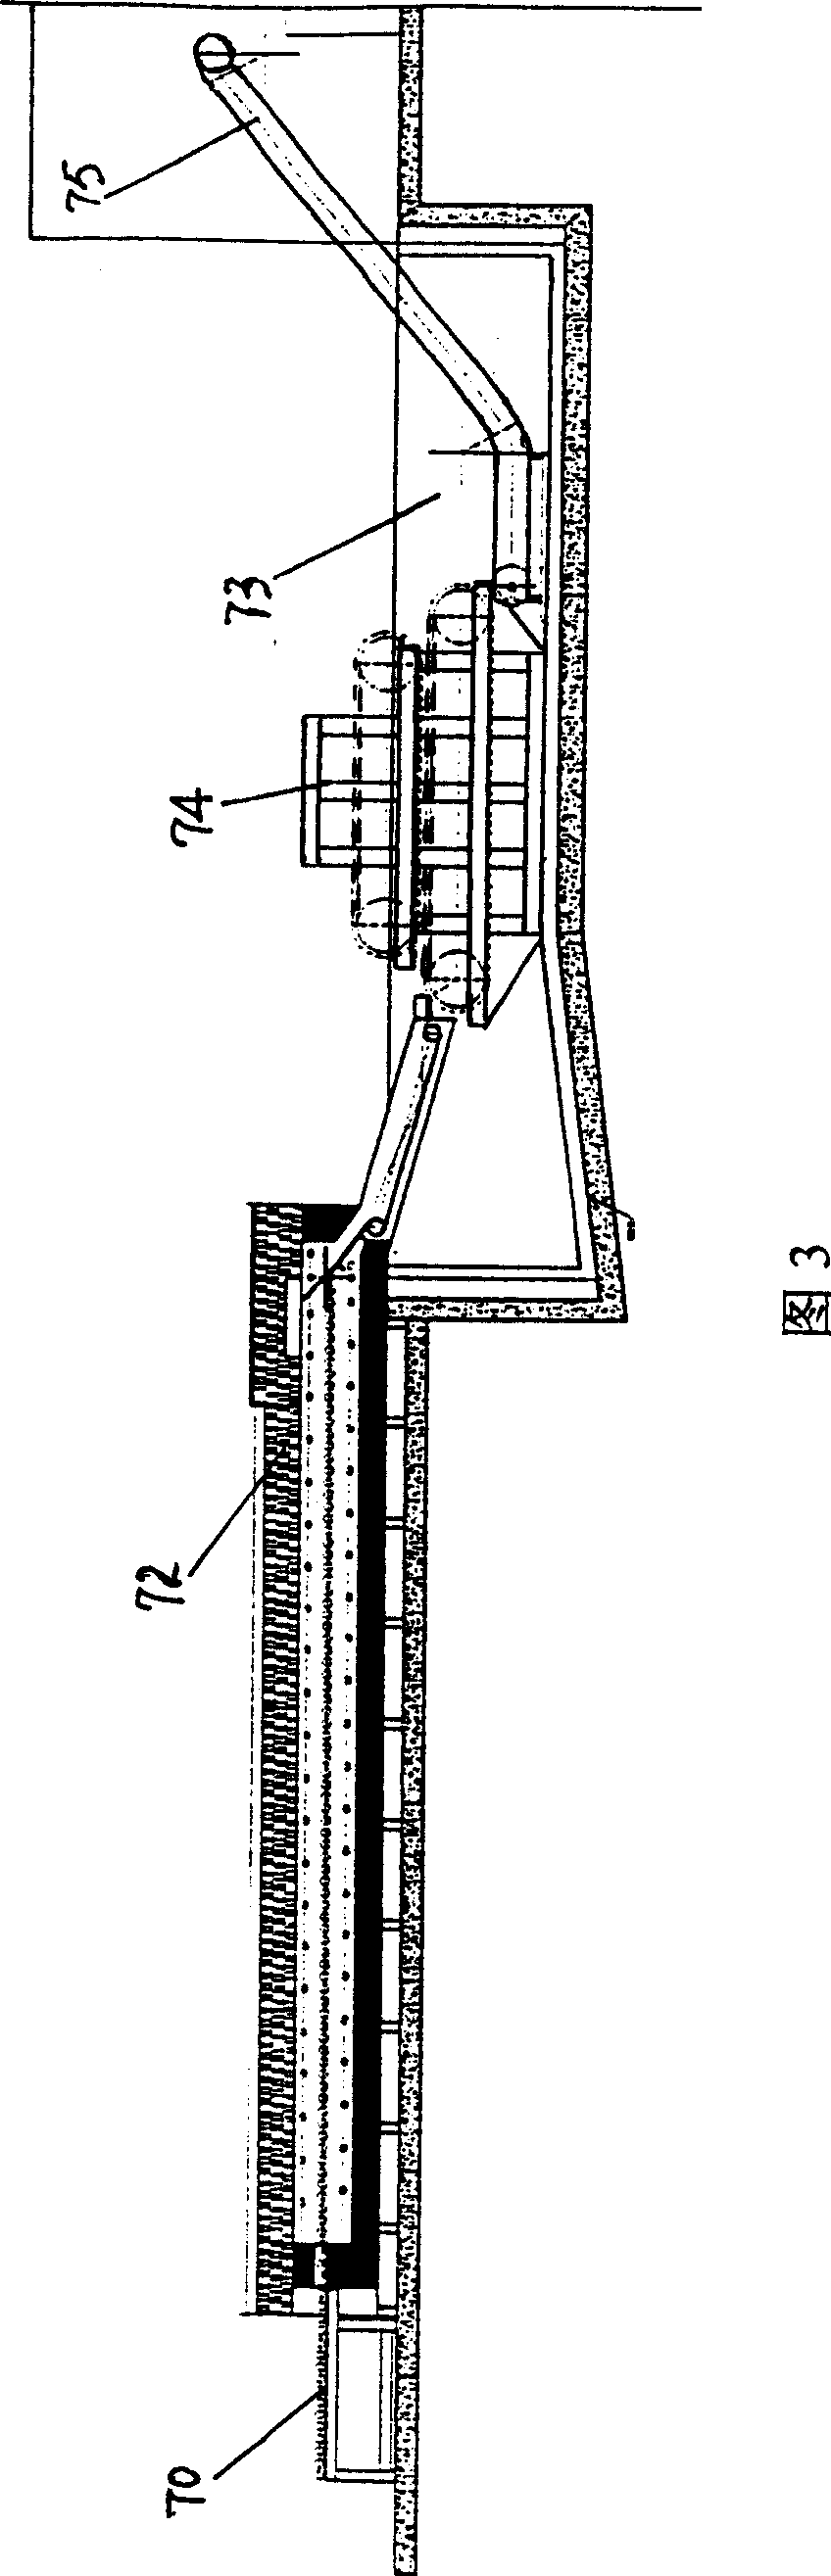 Deformation controlling method for sheet material in continuous heat treatment